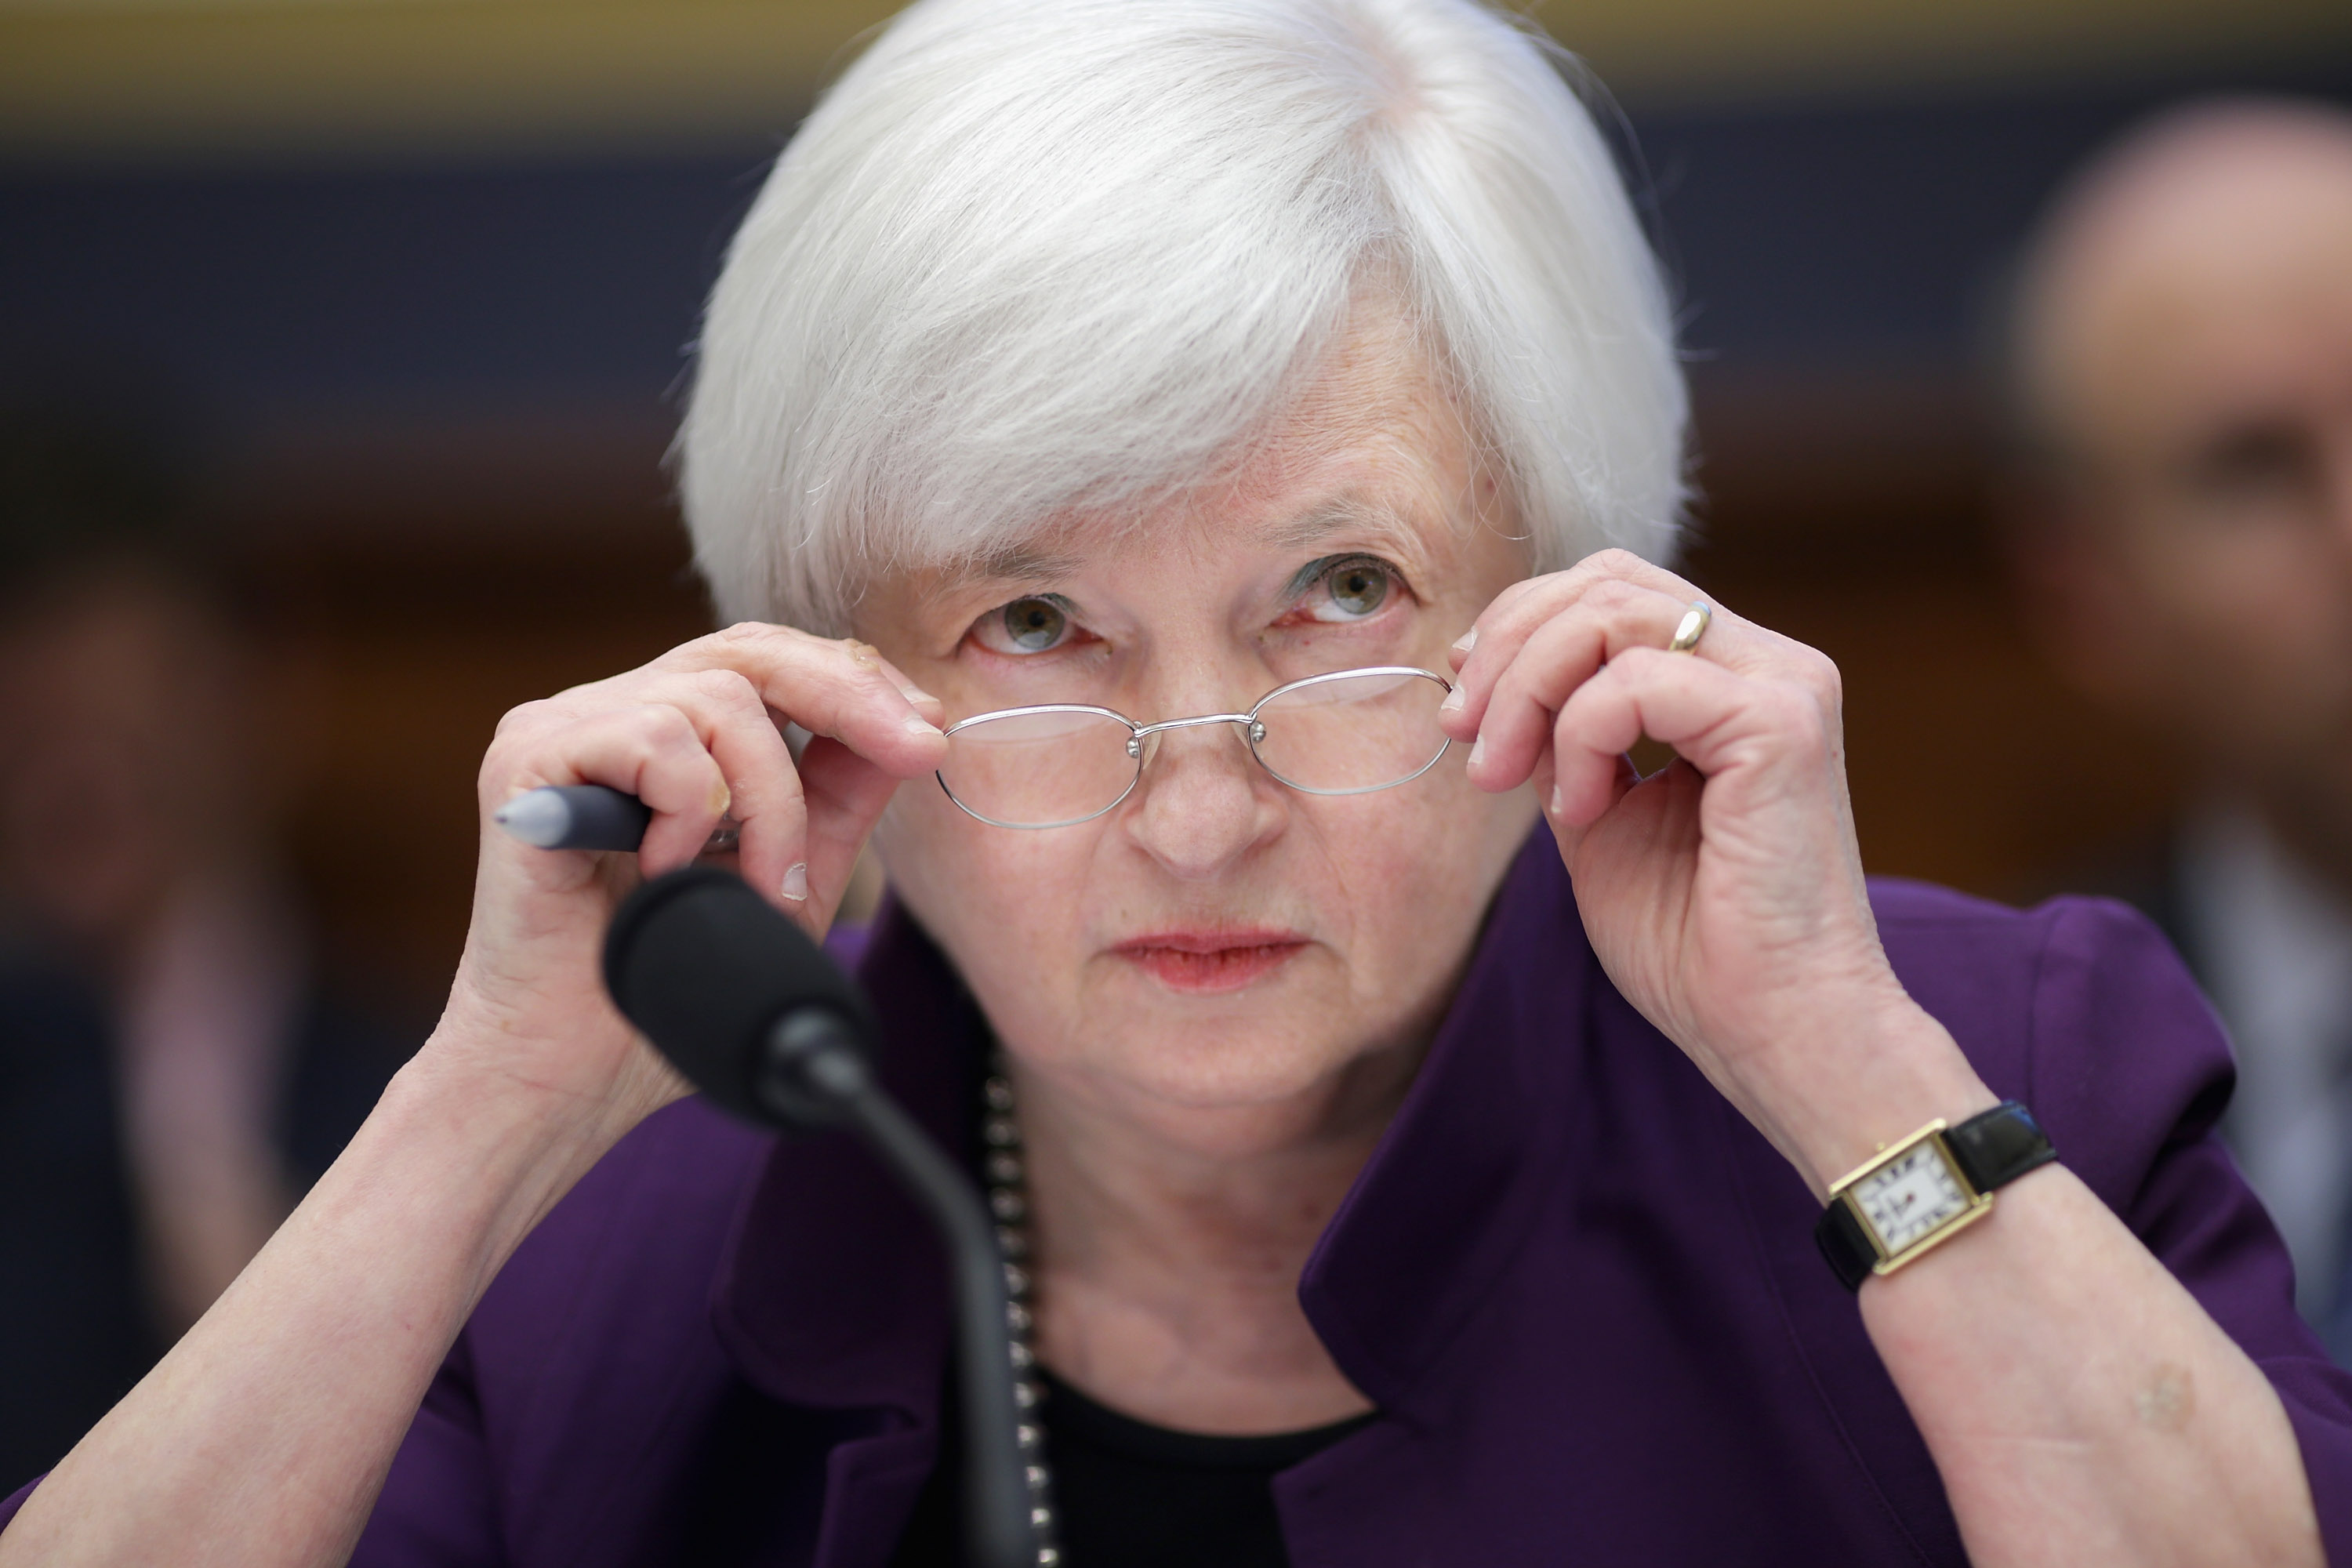 Federal Reserve Chair Janet Yellen testifies before the House Finance Committee in the Rayburn House Office Building November 4, 2015 in Washington, D.C. (Chip Somodevilla&mdash;Getty Images)